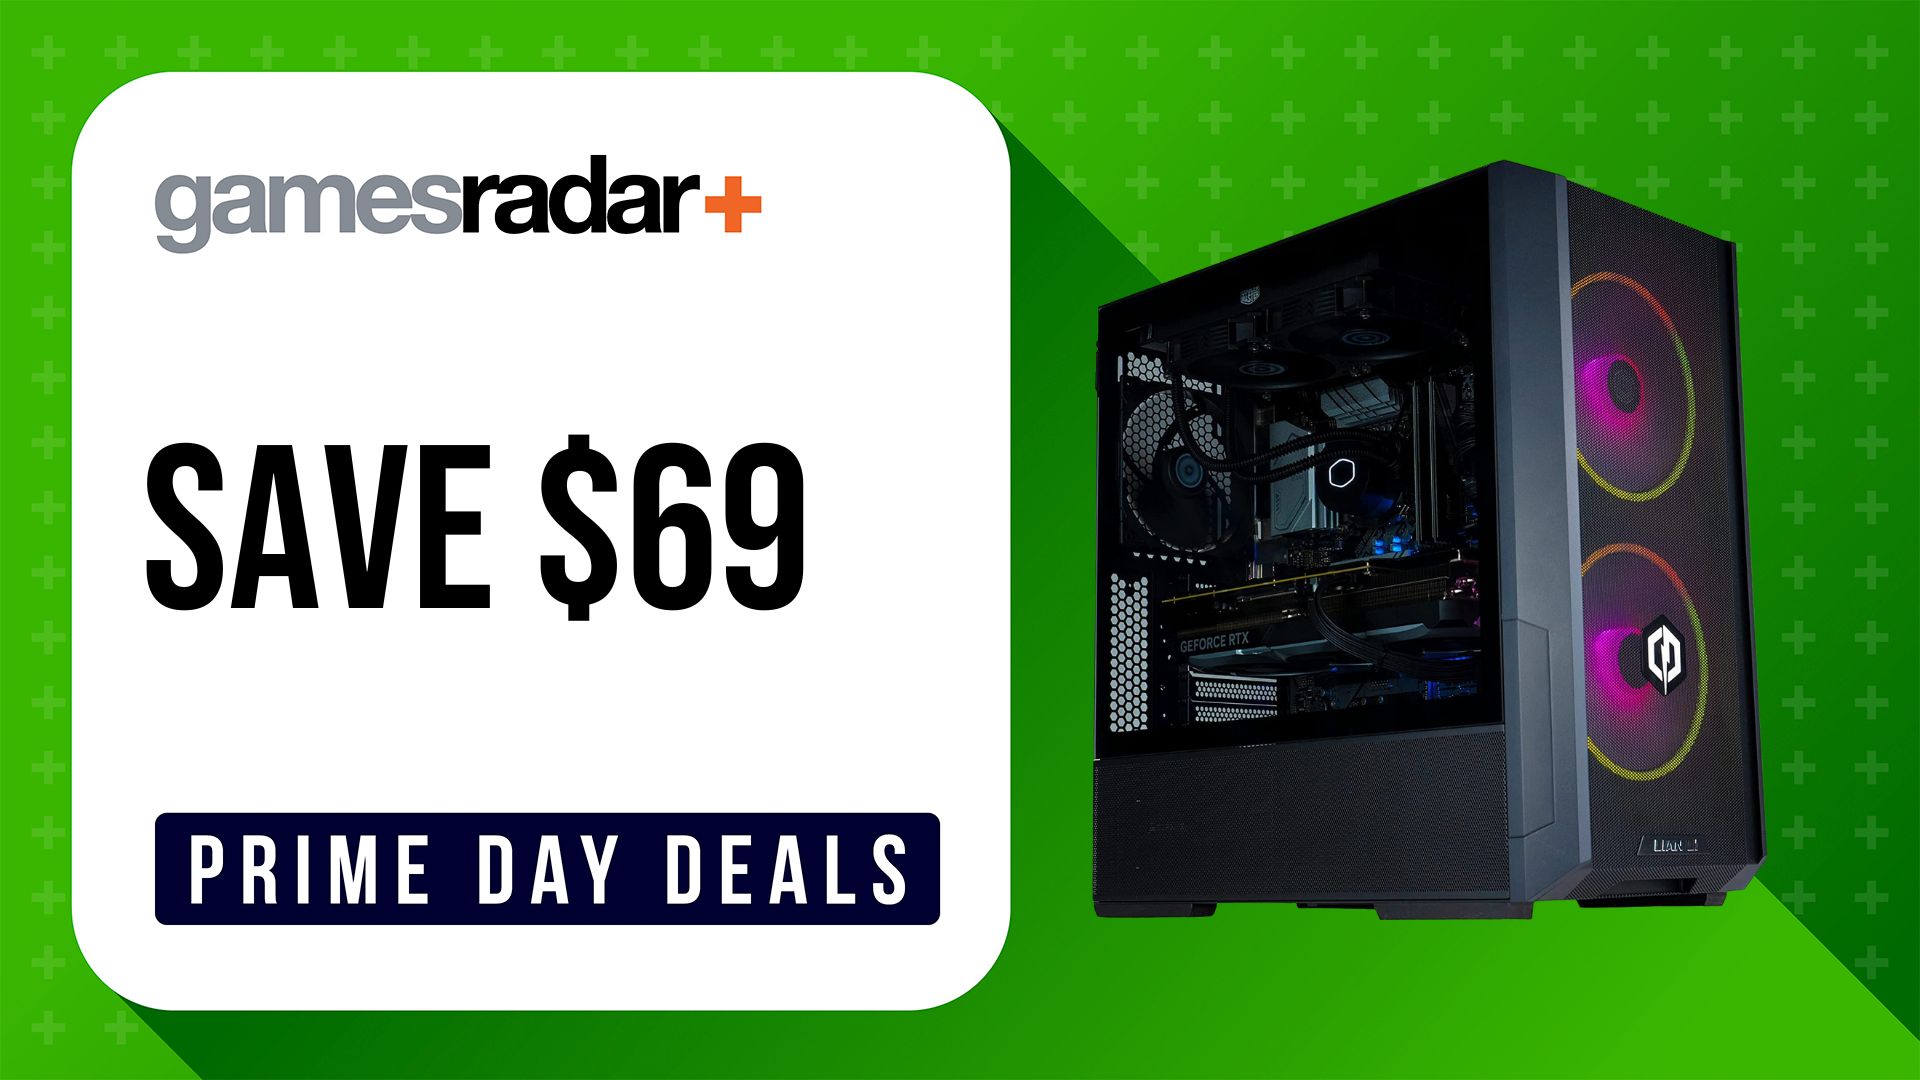 CyberPowerPC Centurian prime day deals image with save $69 stamp